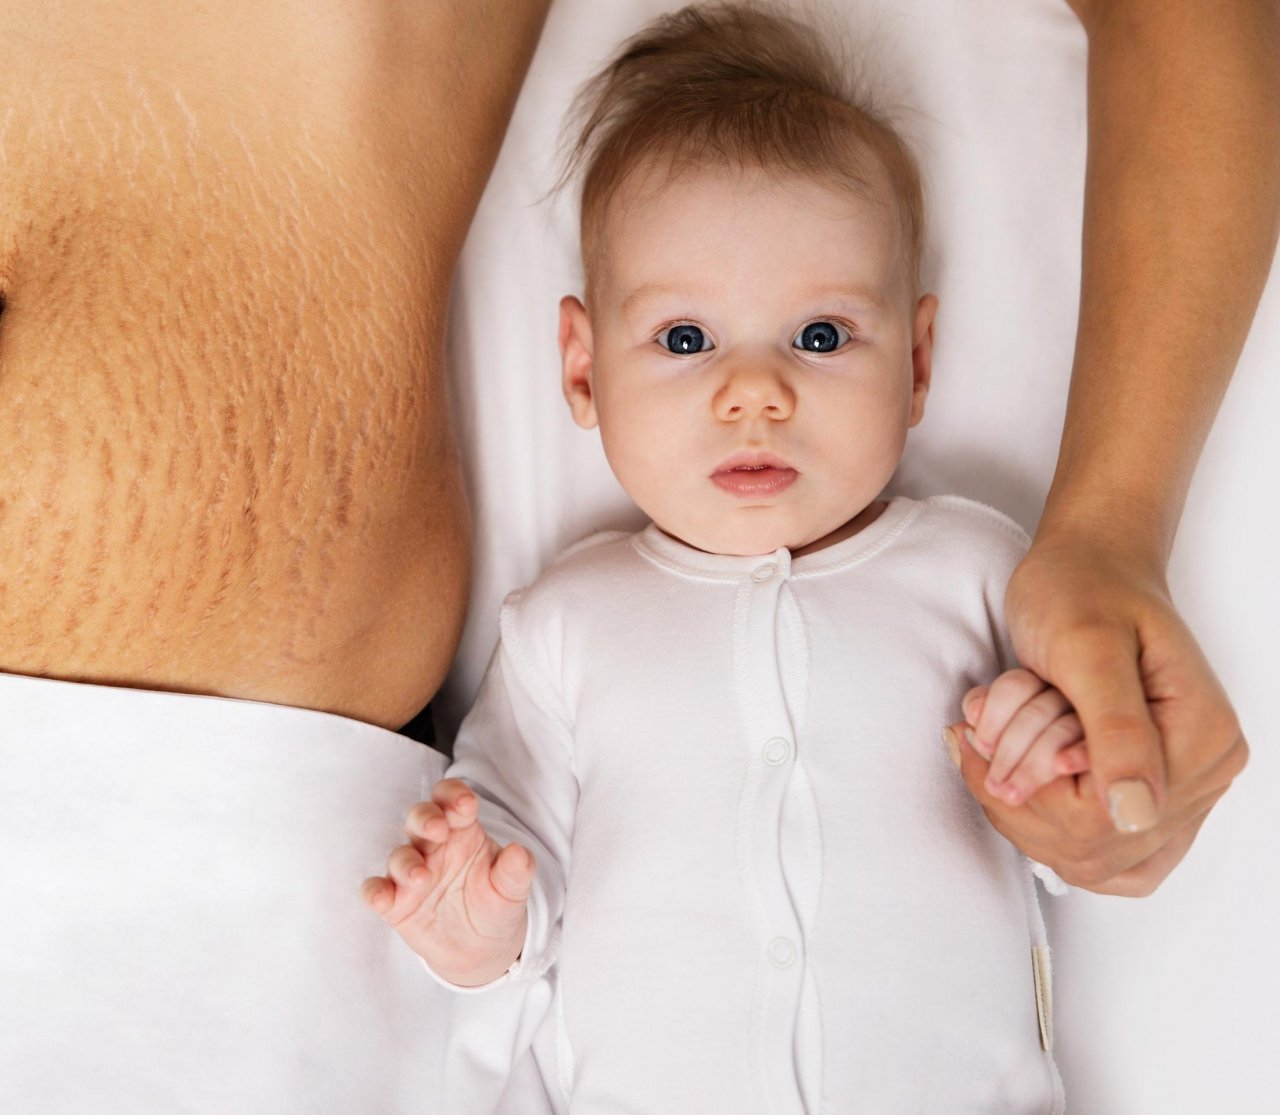 A person with stretch marks beside a baby